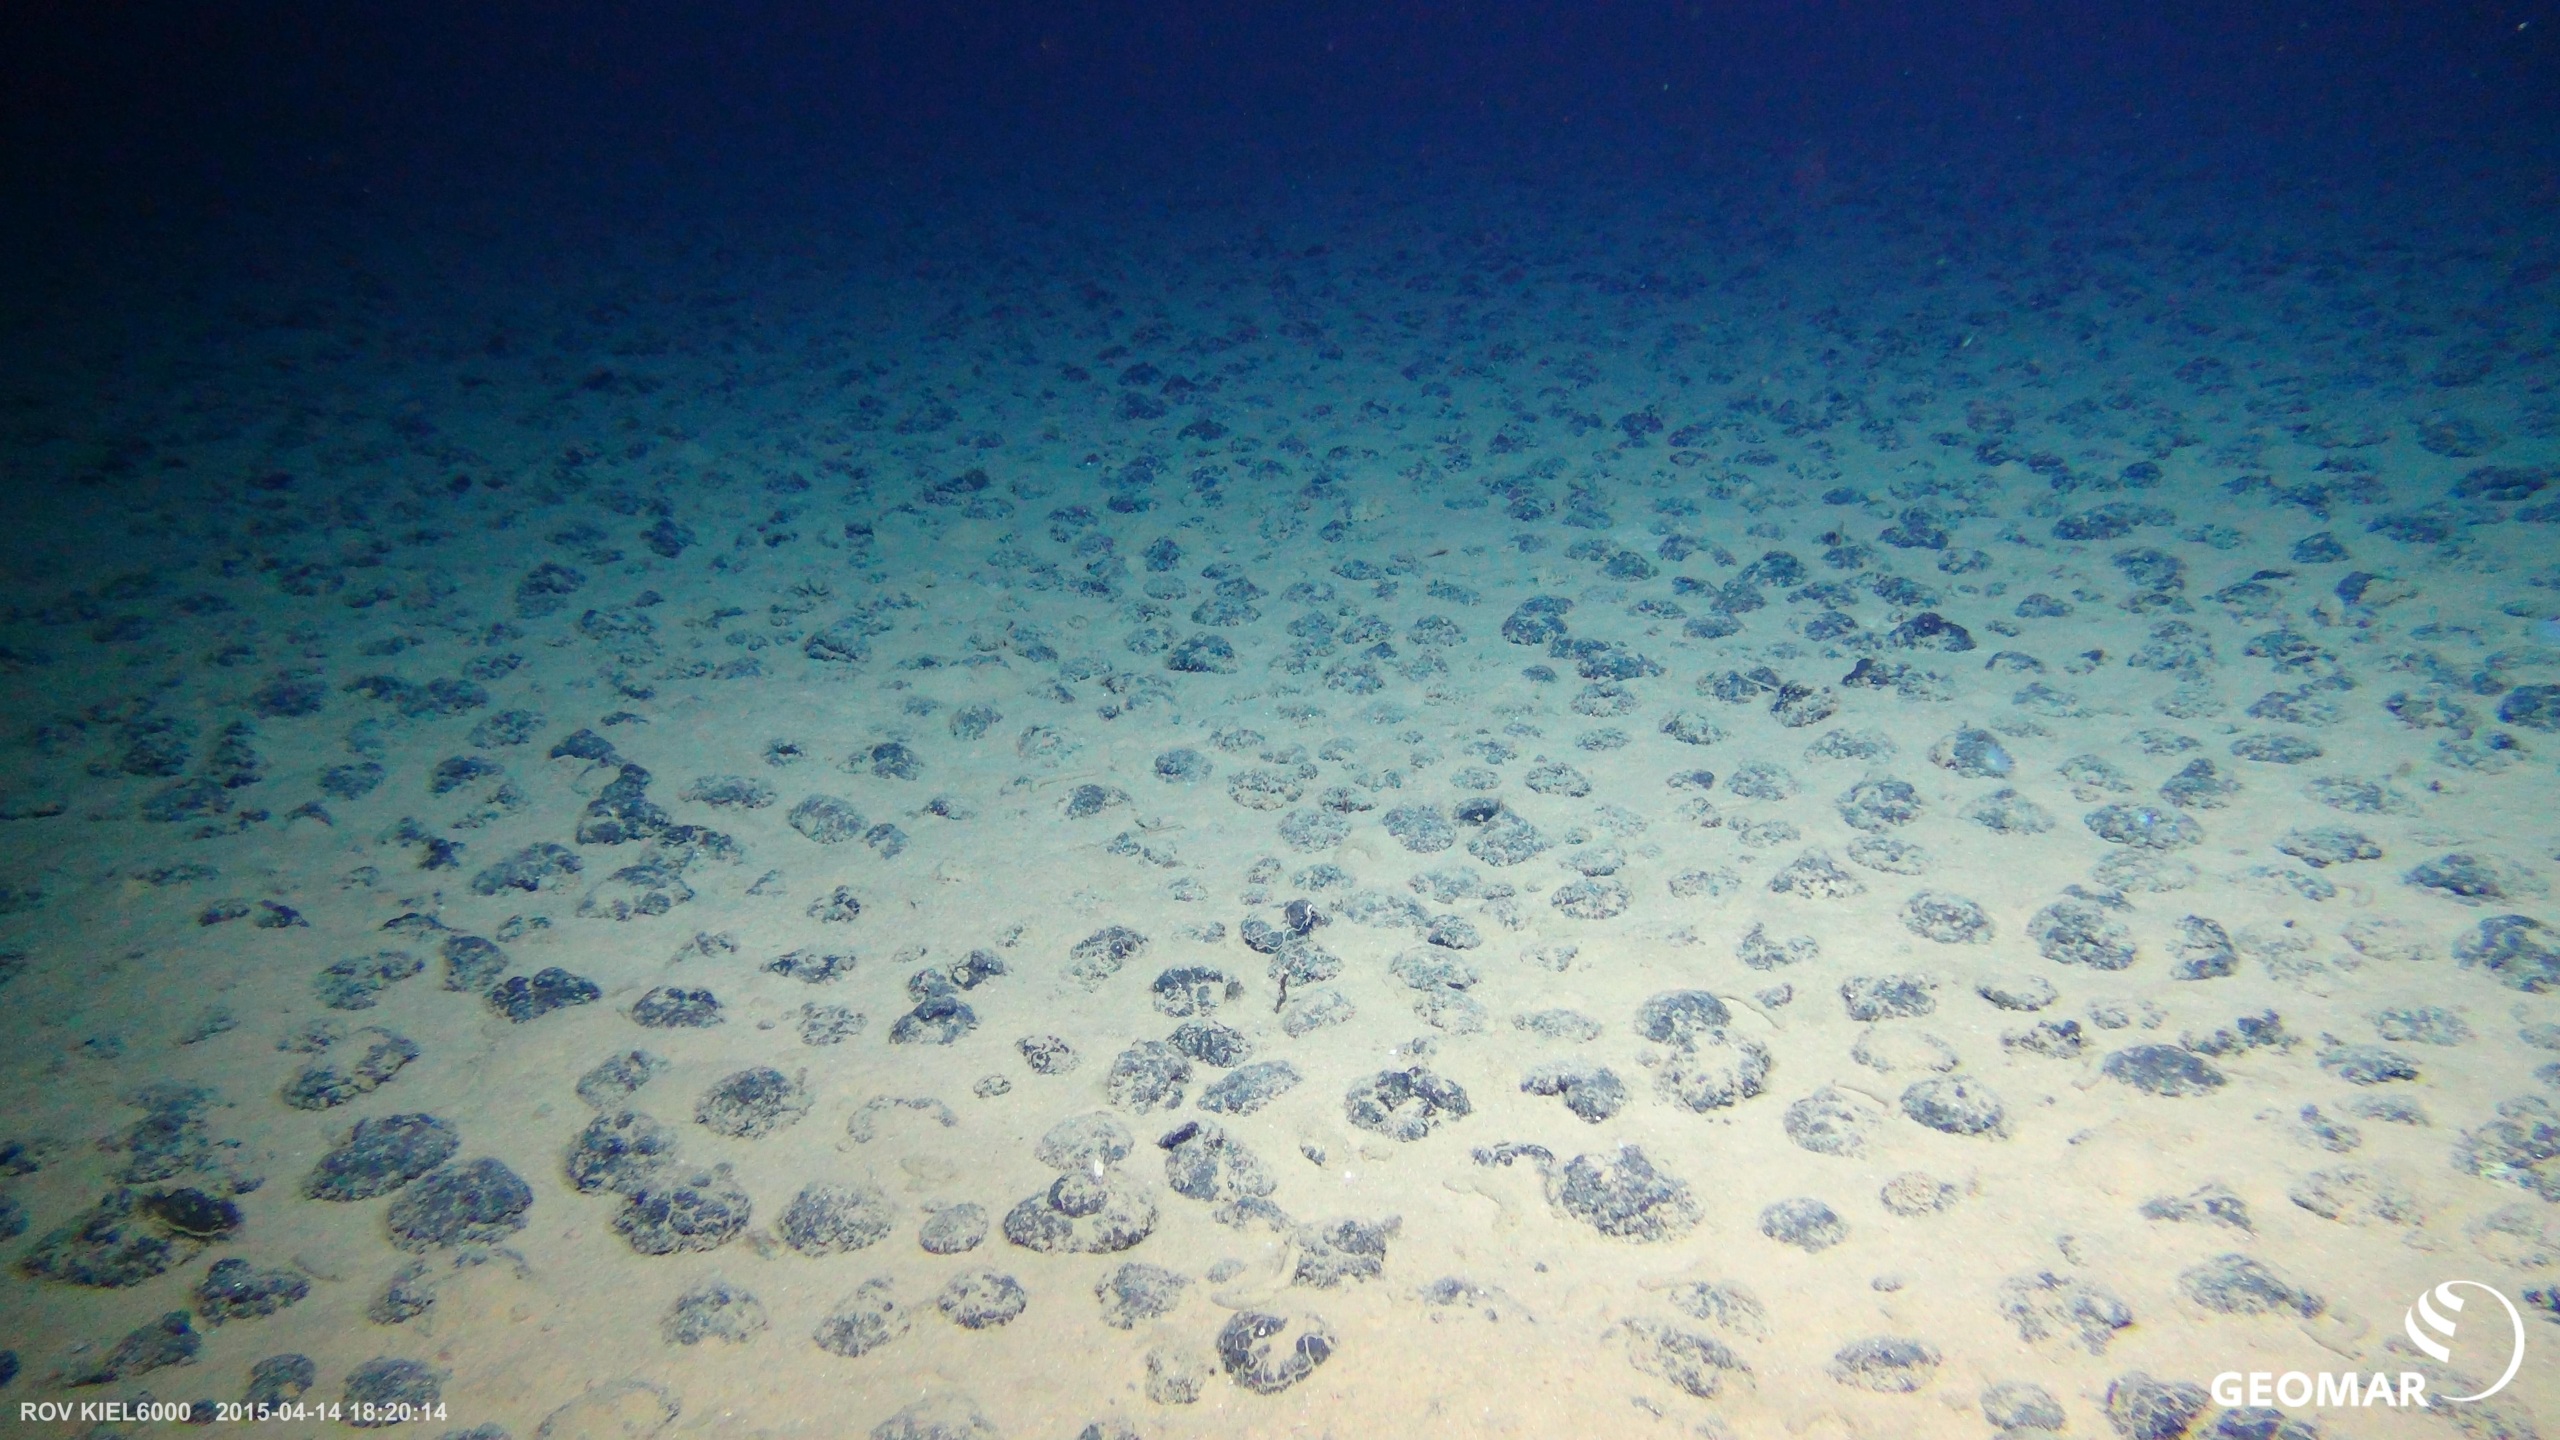 Polymetallic nodules on the floor of the Clarion-Clipperton Zone of the central Pacific Ocean.